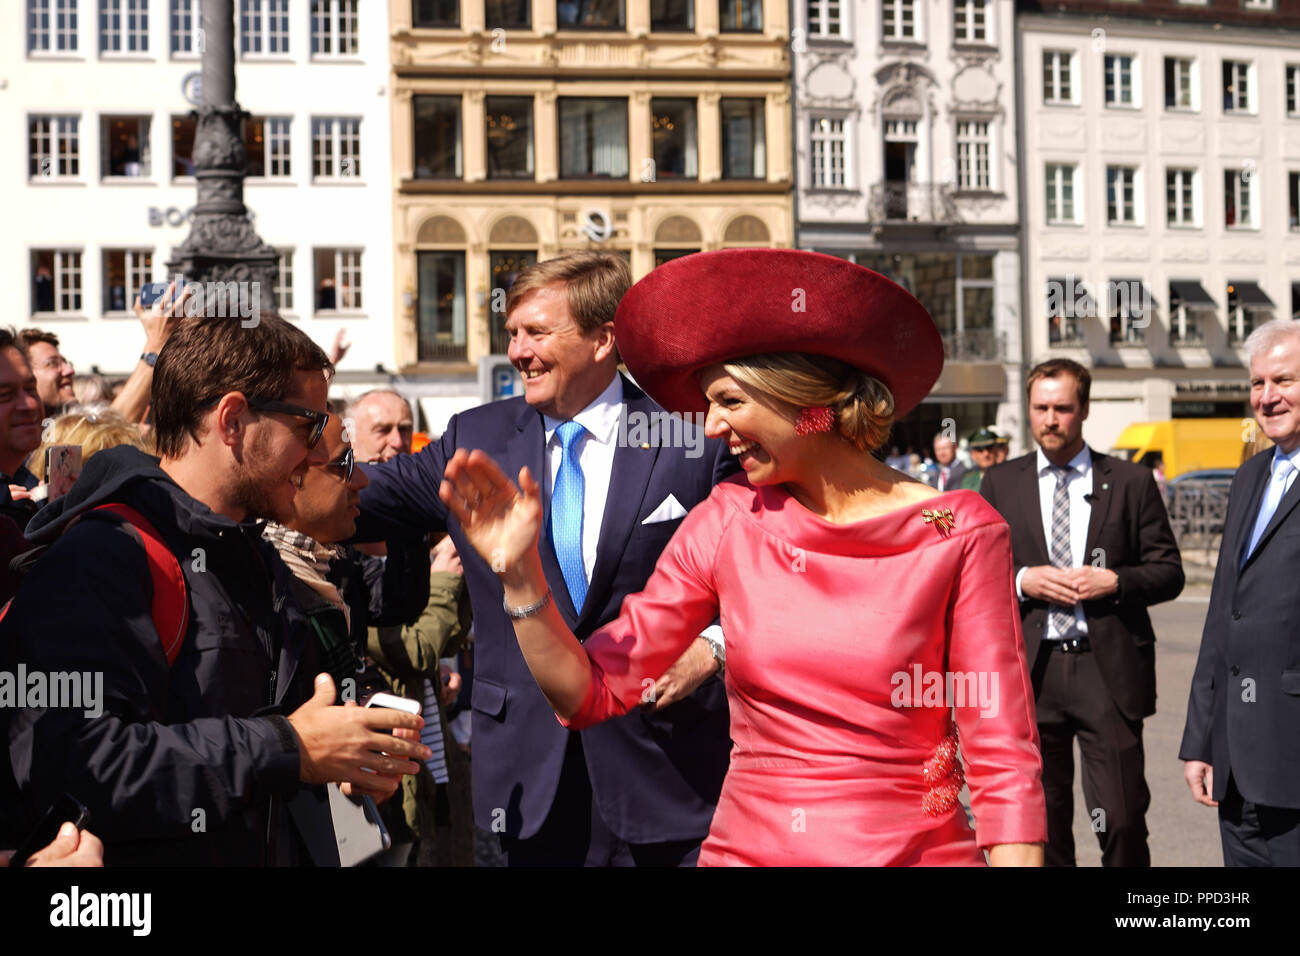 The royal couple of the Netherlands, King Willem-Alexander and Queen Maxima make a stop in Munich during their visit to Bavaria. Cheering people line the way of the royal couple to the reception in the Residenz. On the right, the Bavarian Prime Minister, Horst Seehofer. Stock Photo